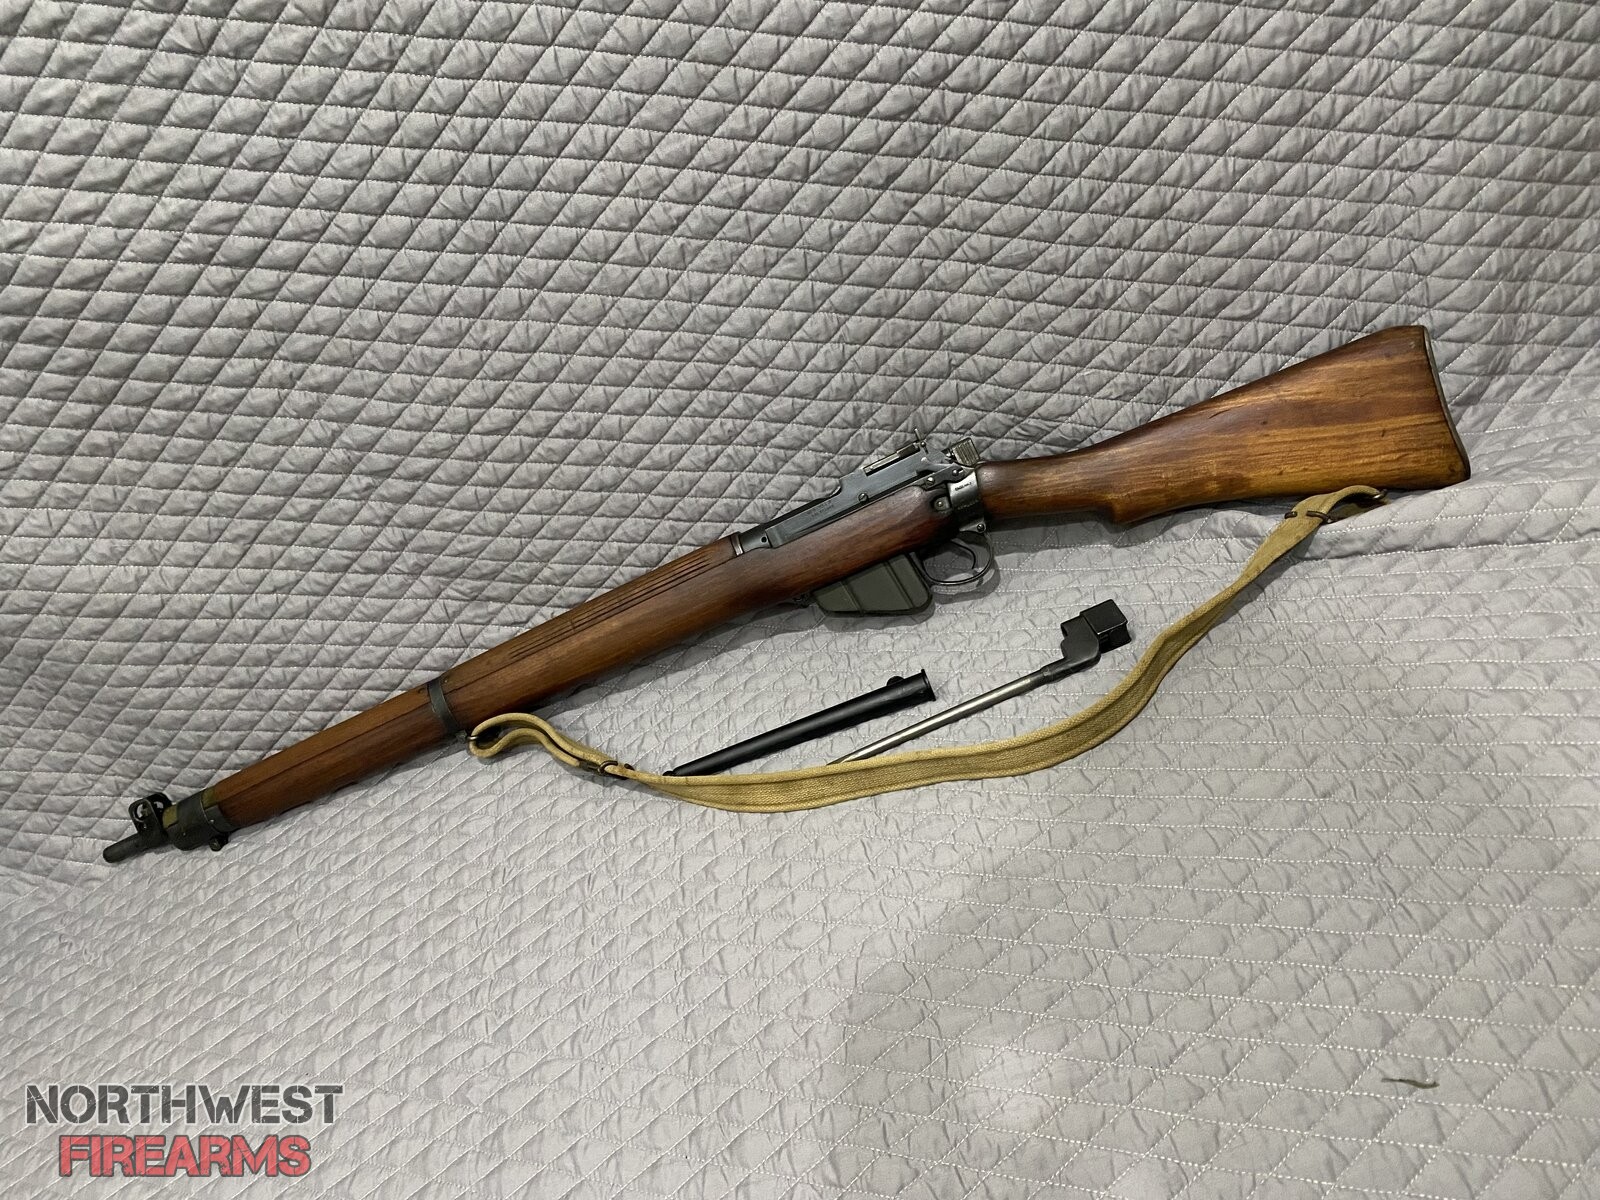 Lee-enfield Ww2 No.4 M1 Long Branch - For Sale 